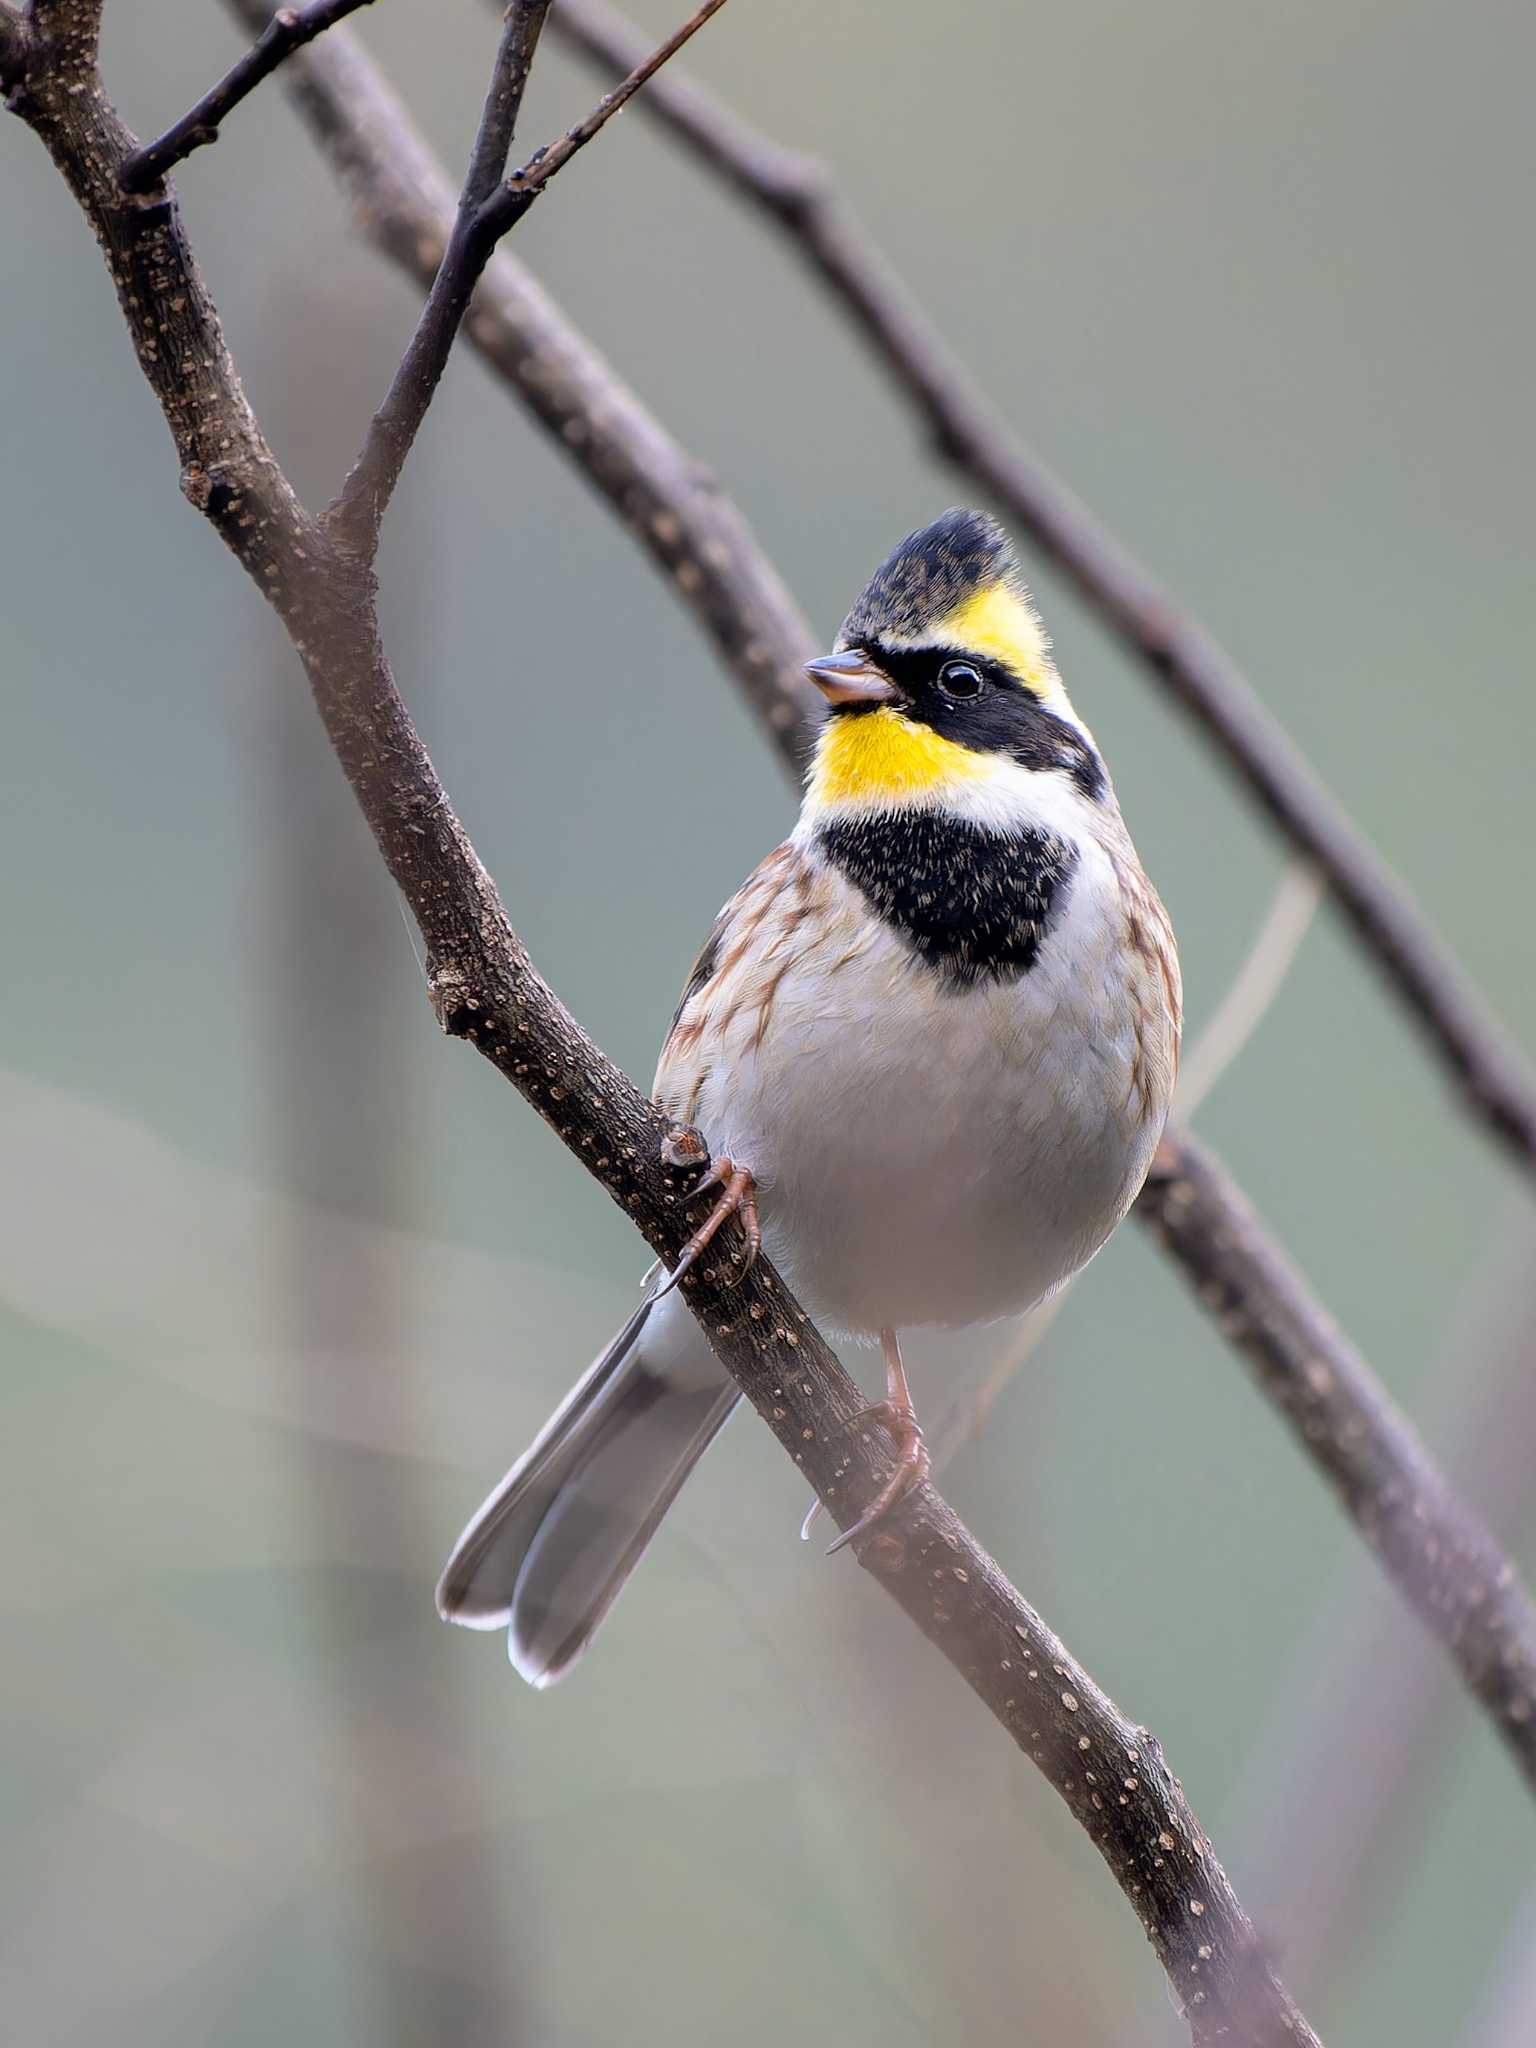 Photo of Yellow-throated Bunting at 長崎県 by ここは長崎